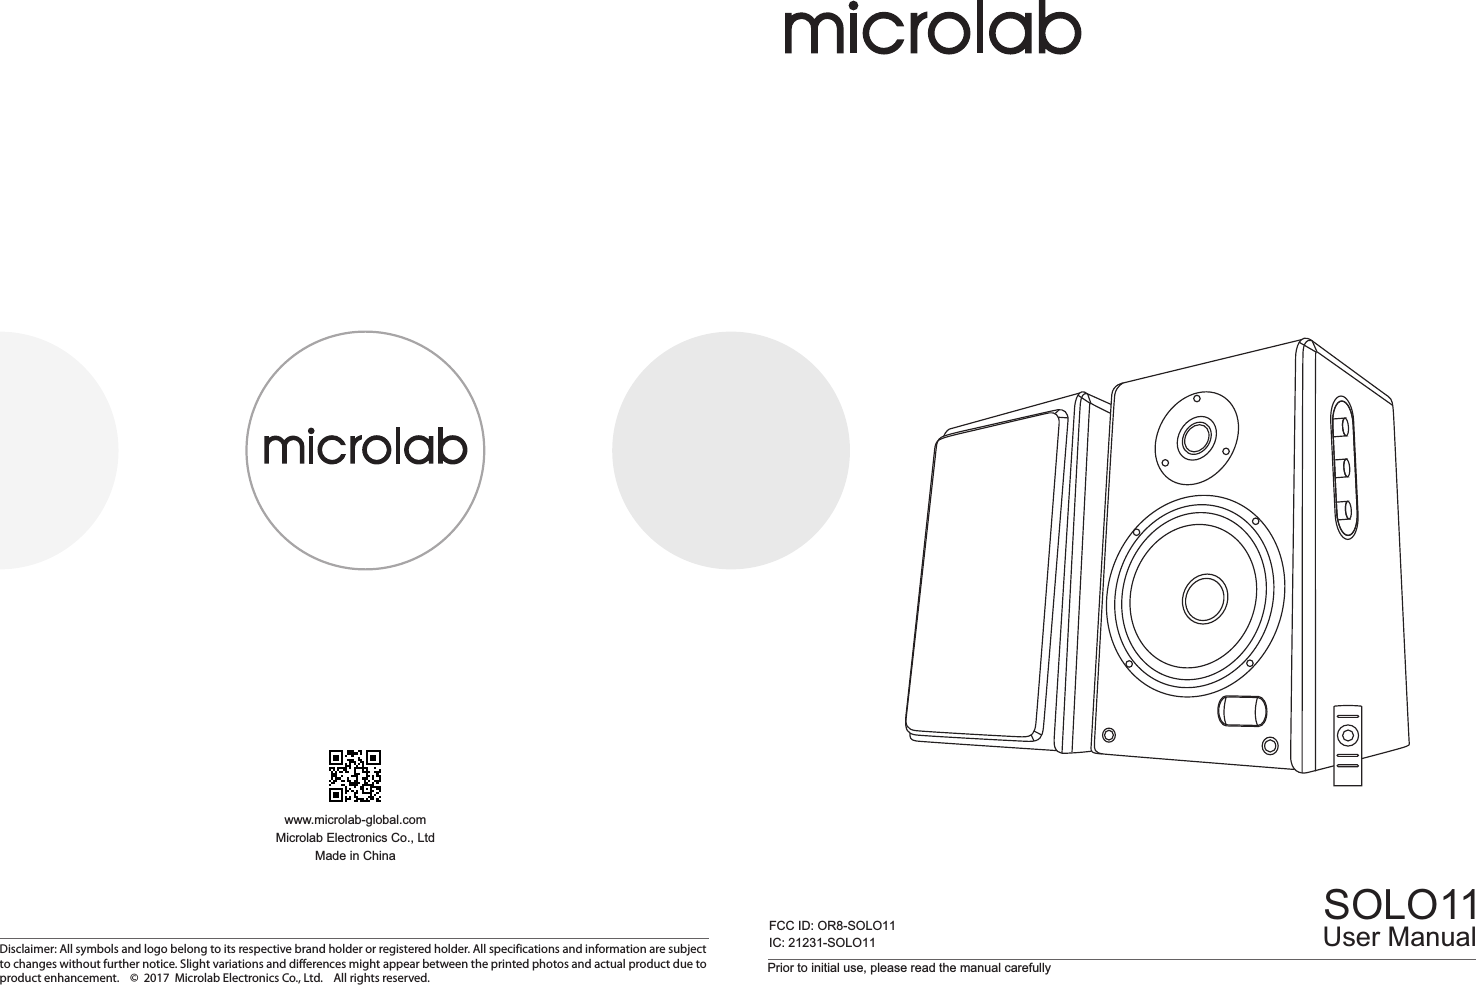 Prior to initial use, please read the manual carefullySOLO11www.microlab-global.comMicrolab Electronics Co., LtdMade in ChinaUser ManualDisclaimer: All symbols and logo belong to its respective brand holder or registered holder. All specifications and information are subject to changes without further notice. Slight variations and differences might appear between the printed photos and actual product due to product enhancement.    ©  2017  Microlab Electronics Co., Ltd.    All rights reserved.FCC ID: OR8-SOLO11IC: 21231-SOLO1180-SOLO11-97-0001(US)-01   2017-11-21